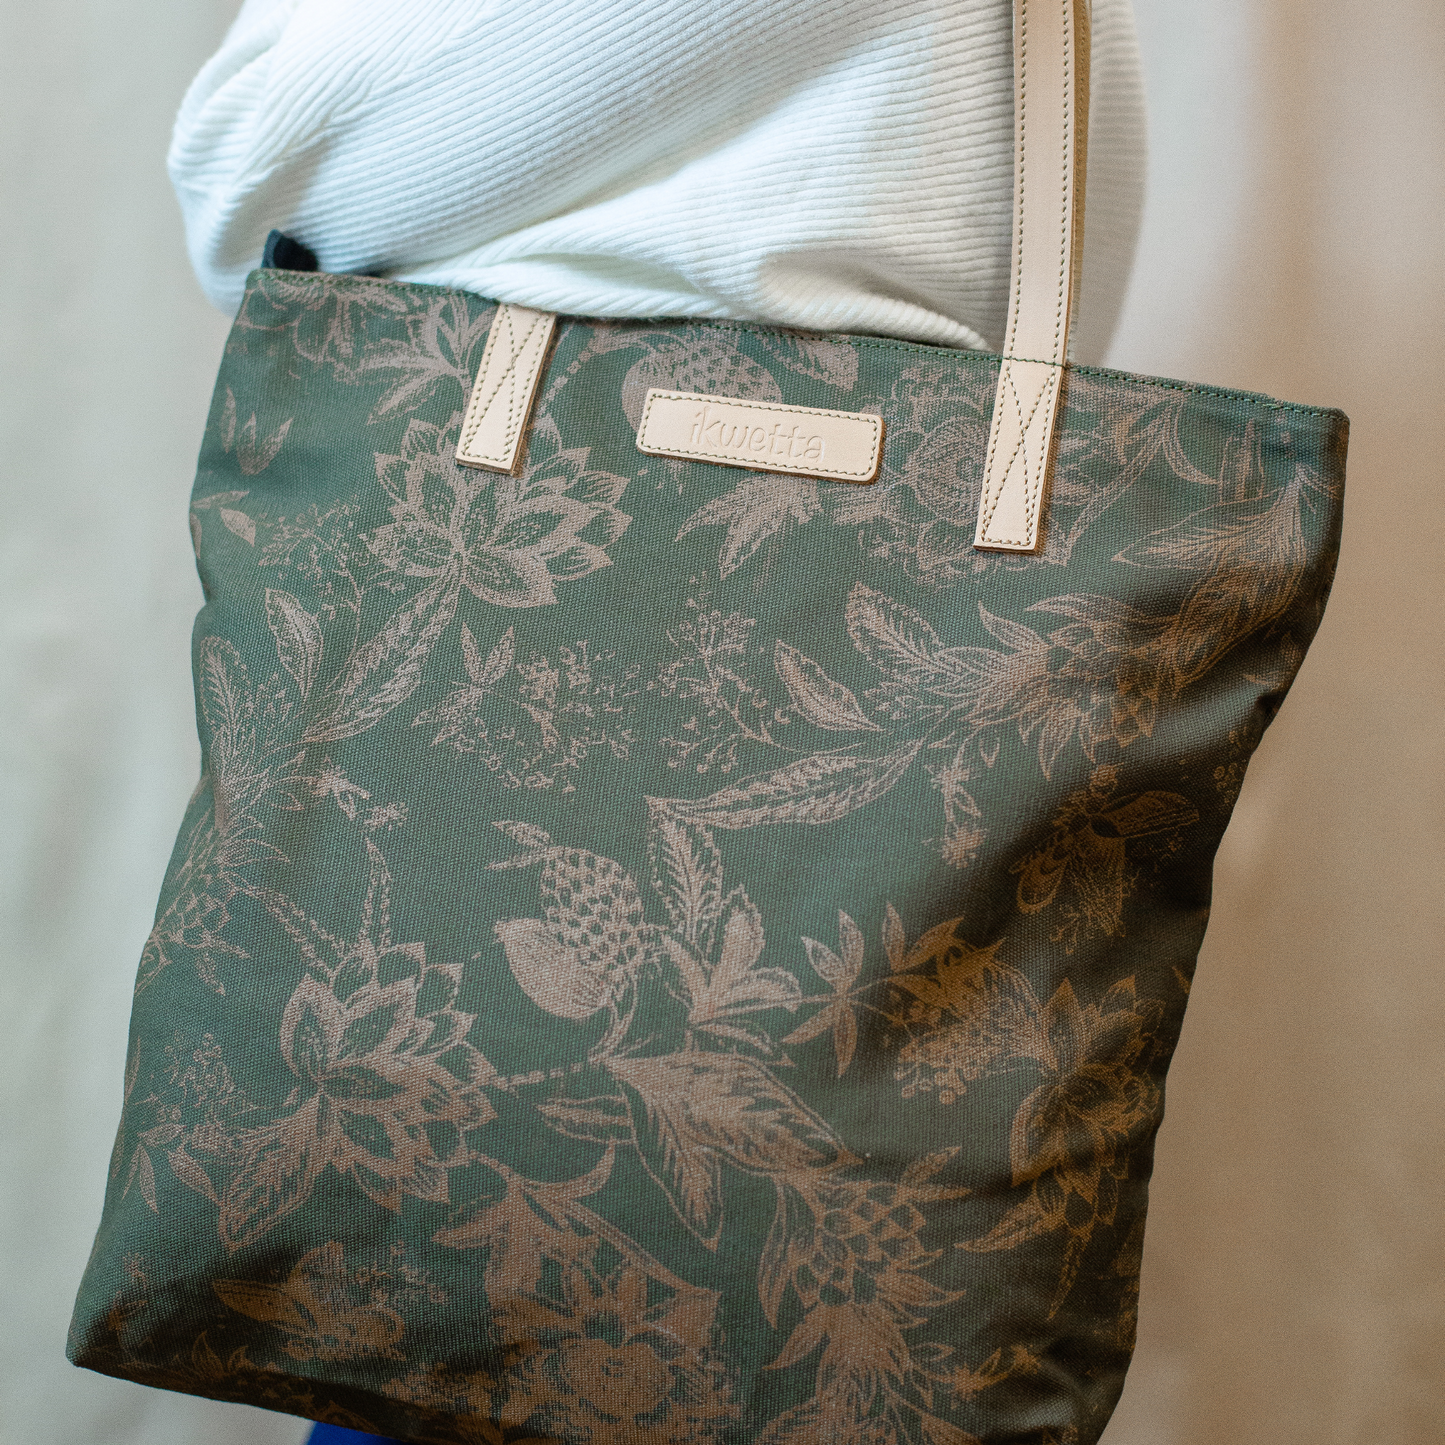 Market tote in green print canvas and leather handles